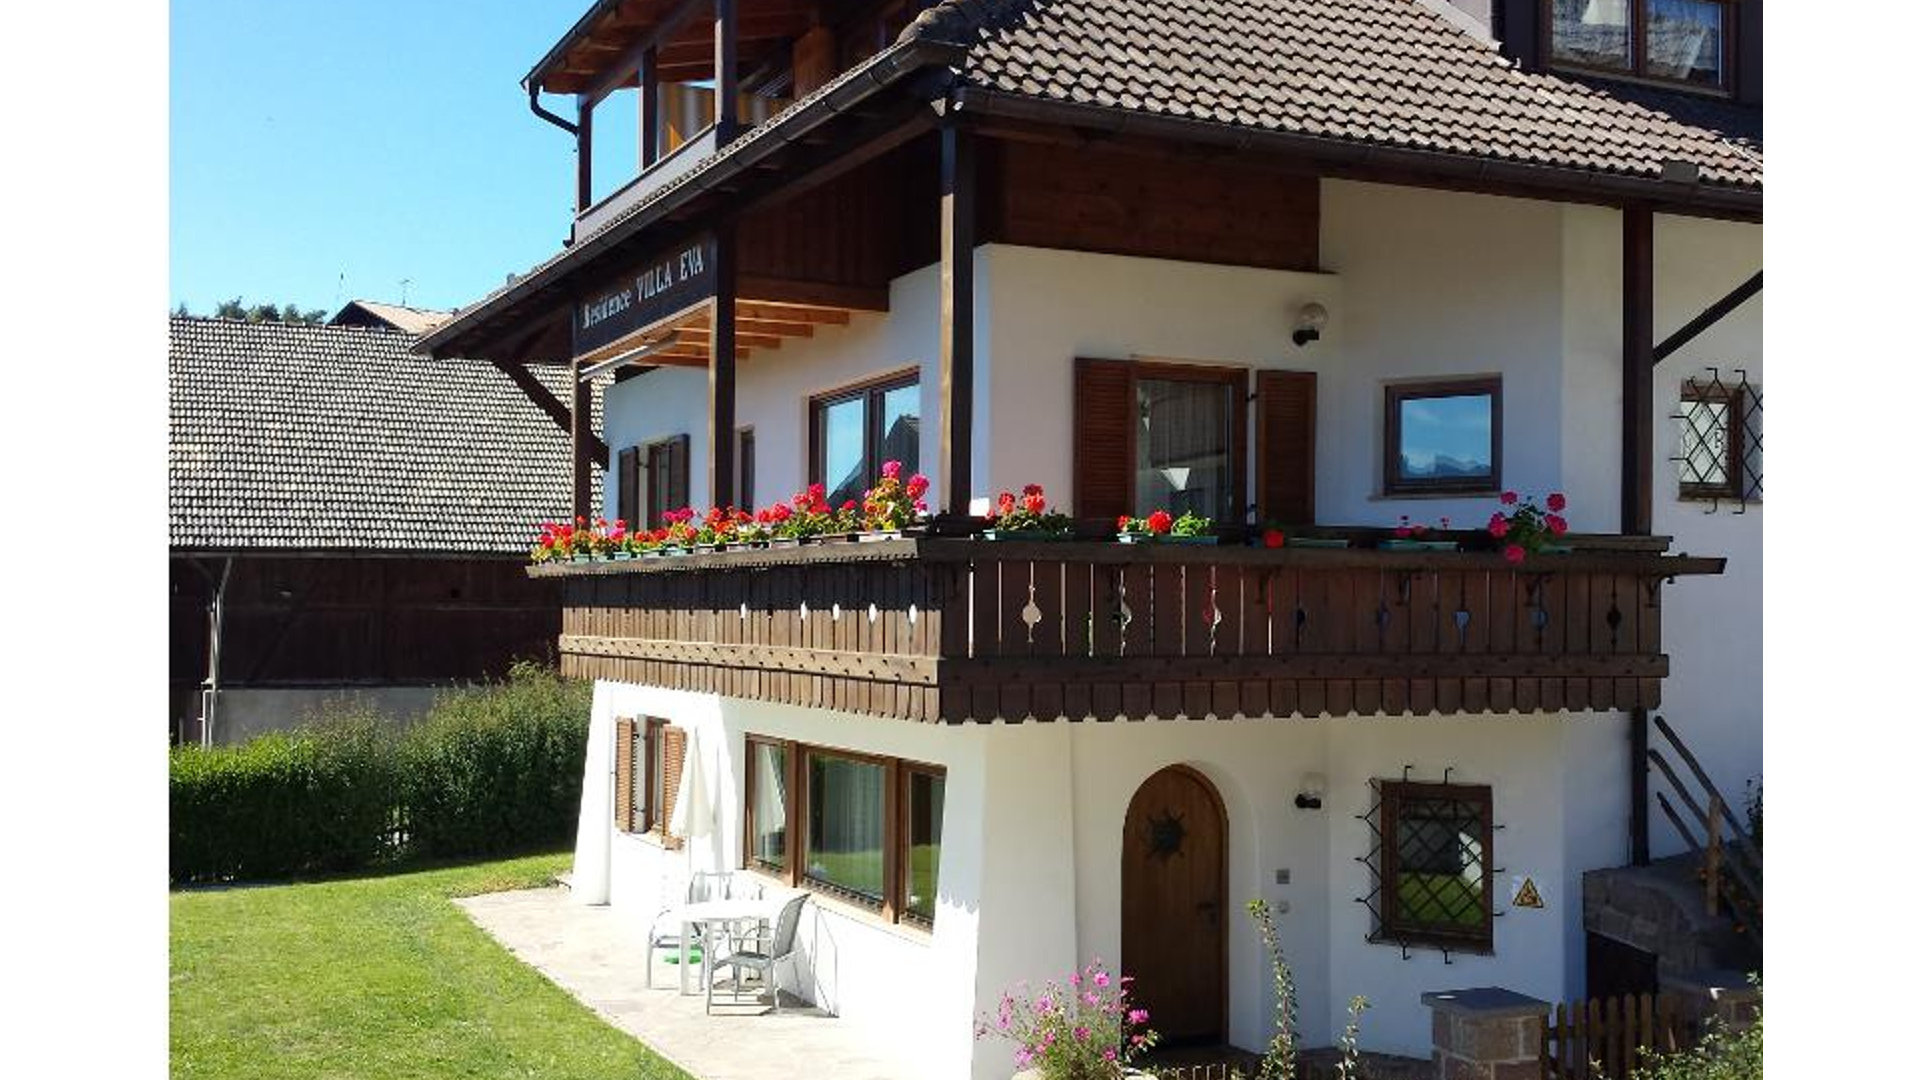 Holiday in Renon in apartments by train or by car